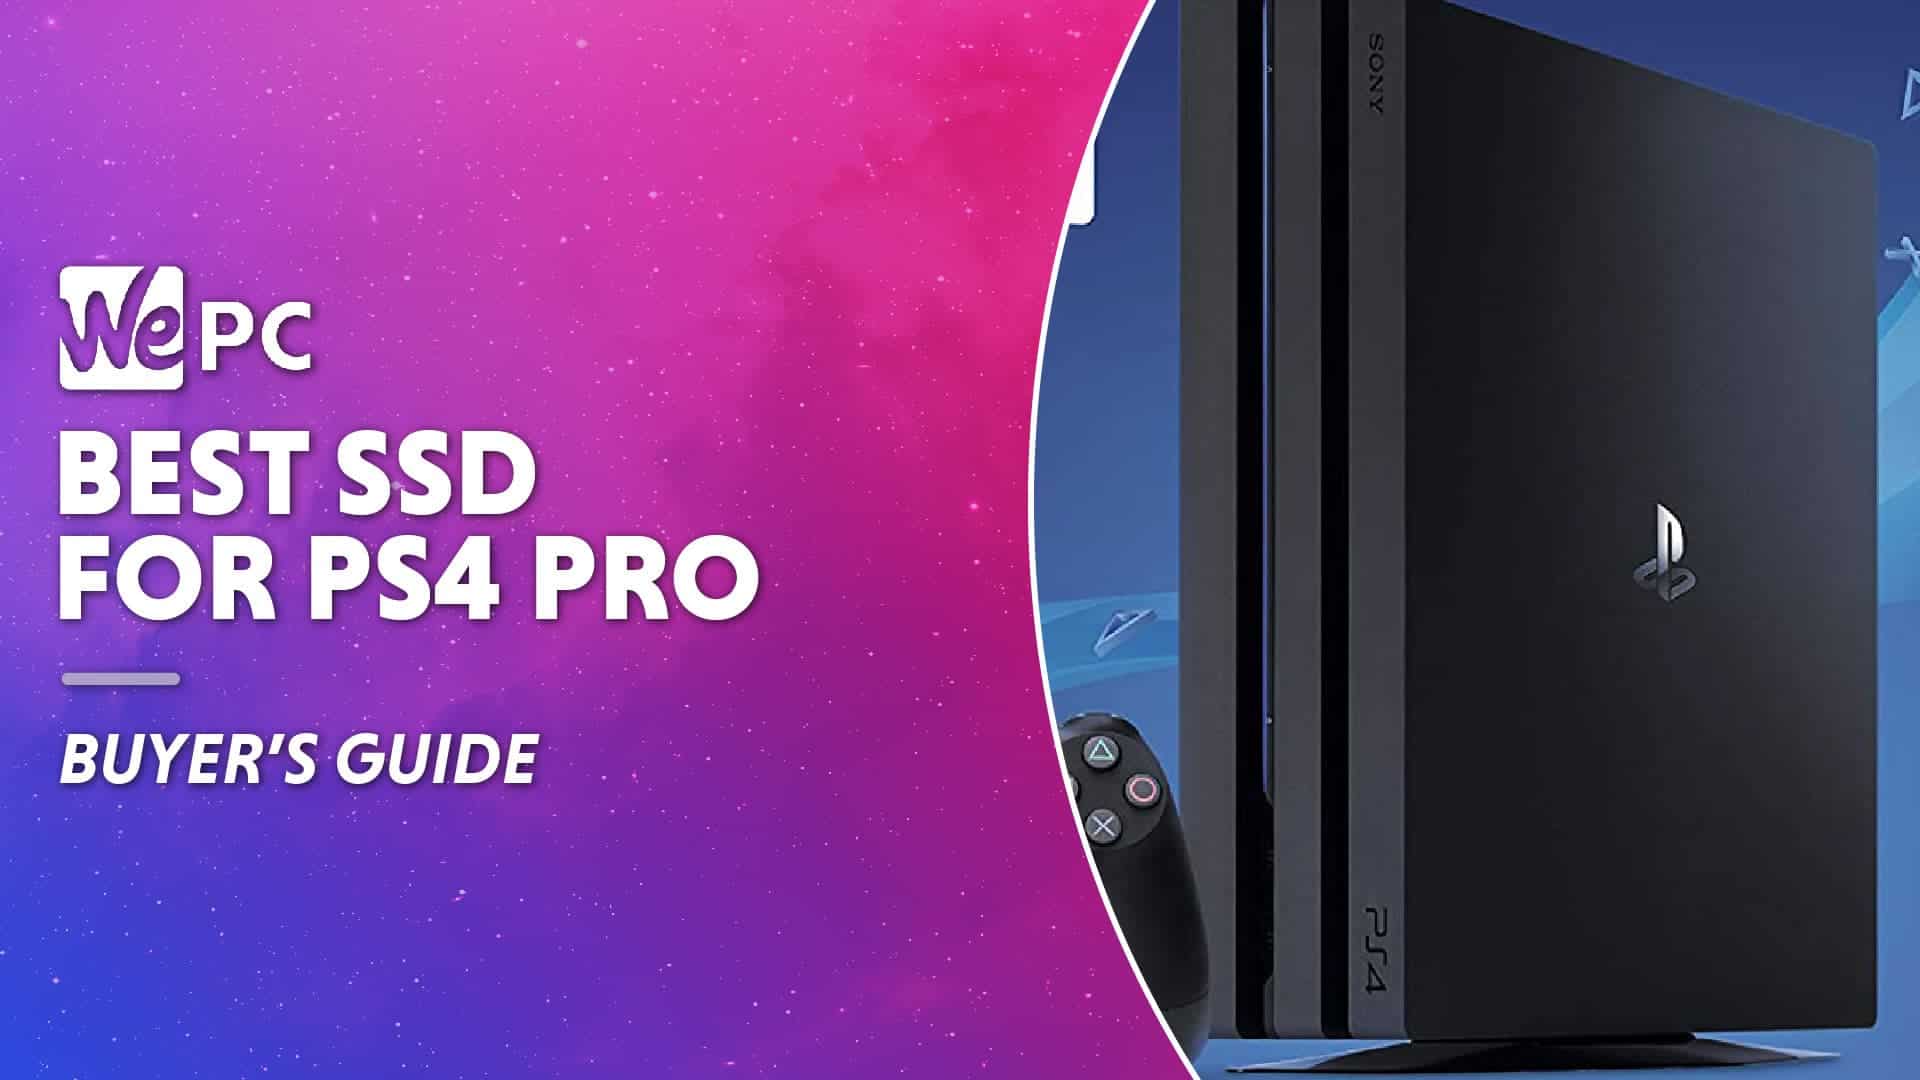 WEPC Best SSD for PS4 pro Featured image 01